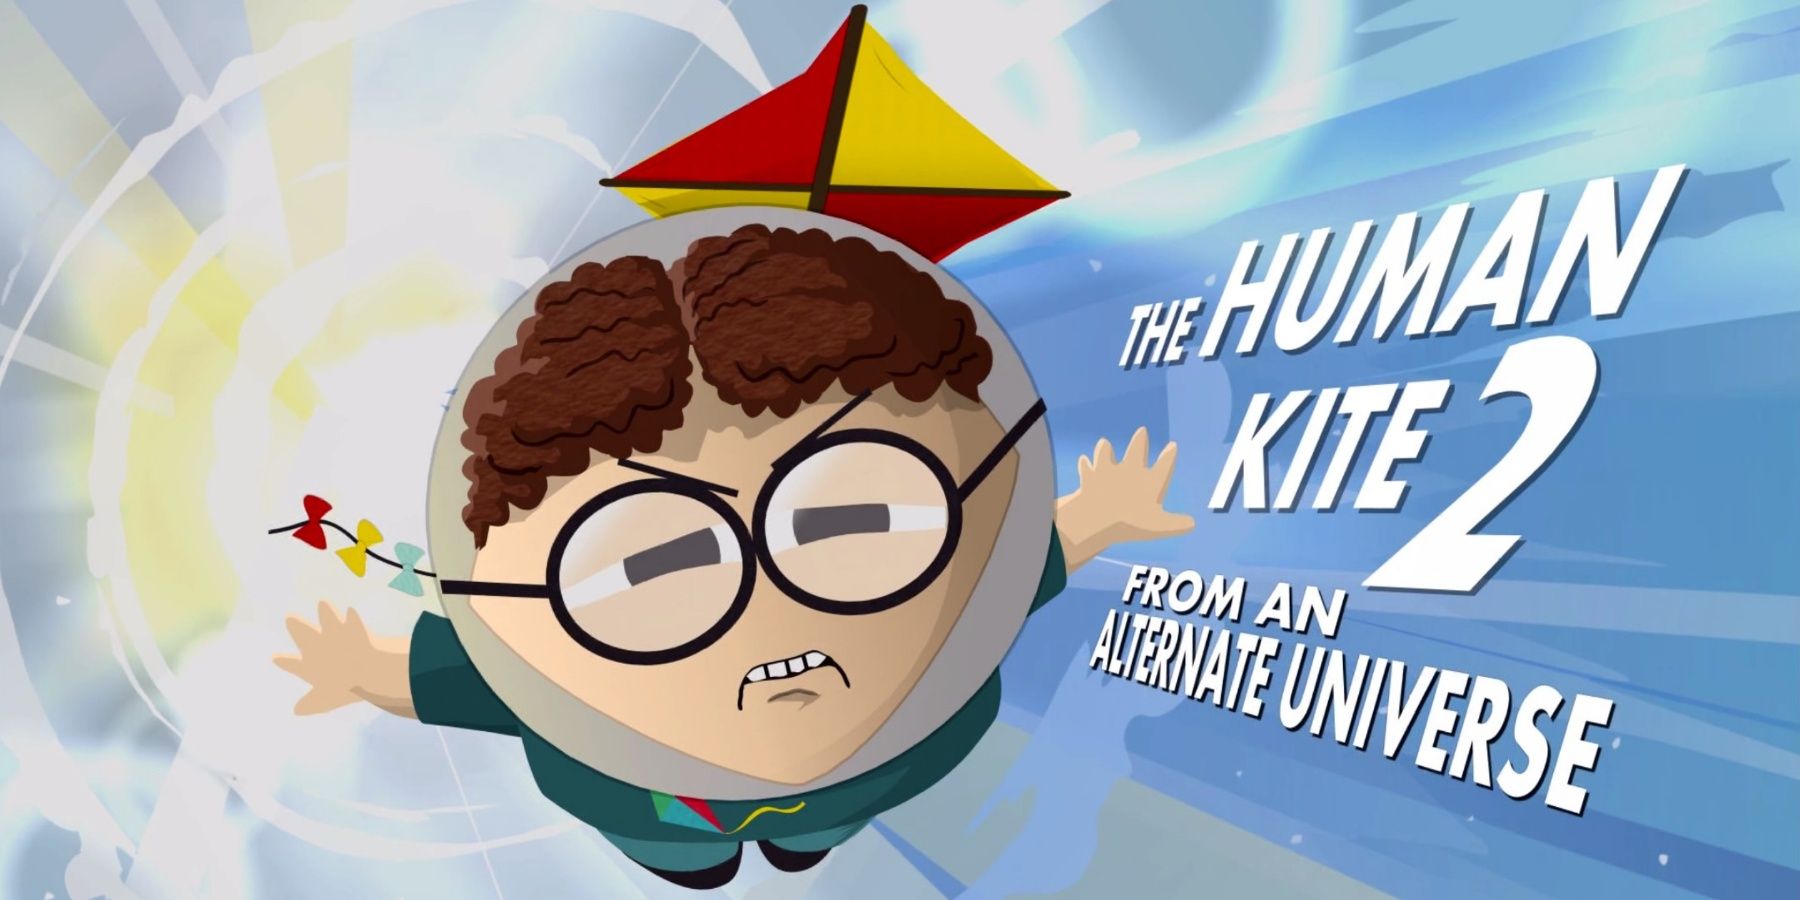 Human Kite 2, a superhero with glasses and a kite flying behind him